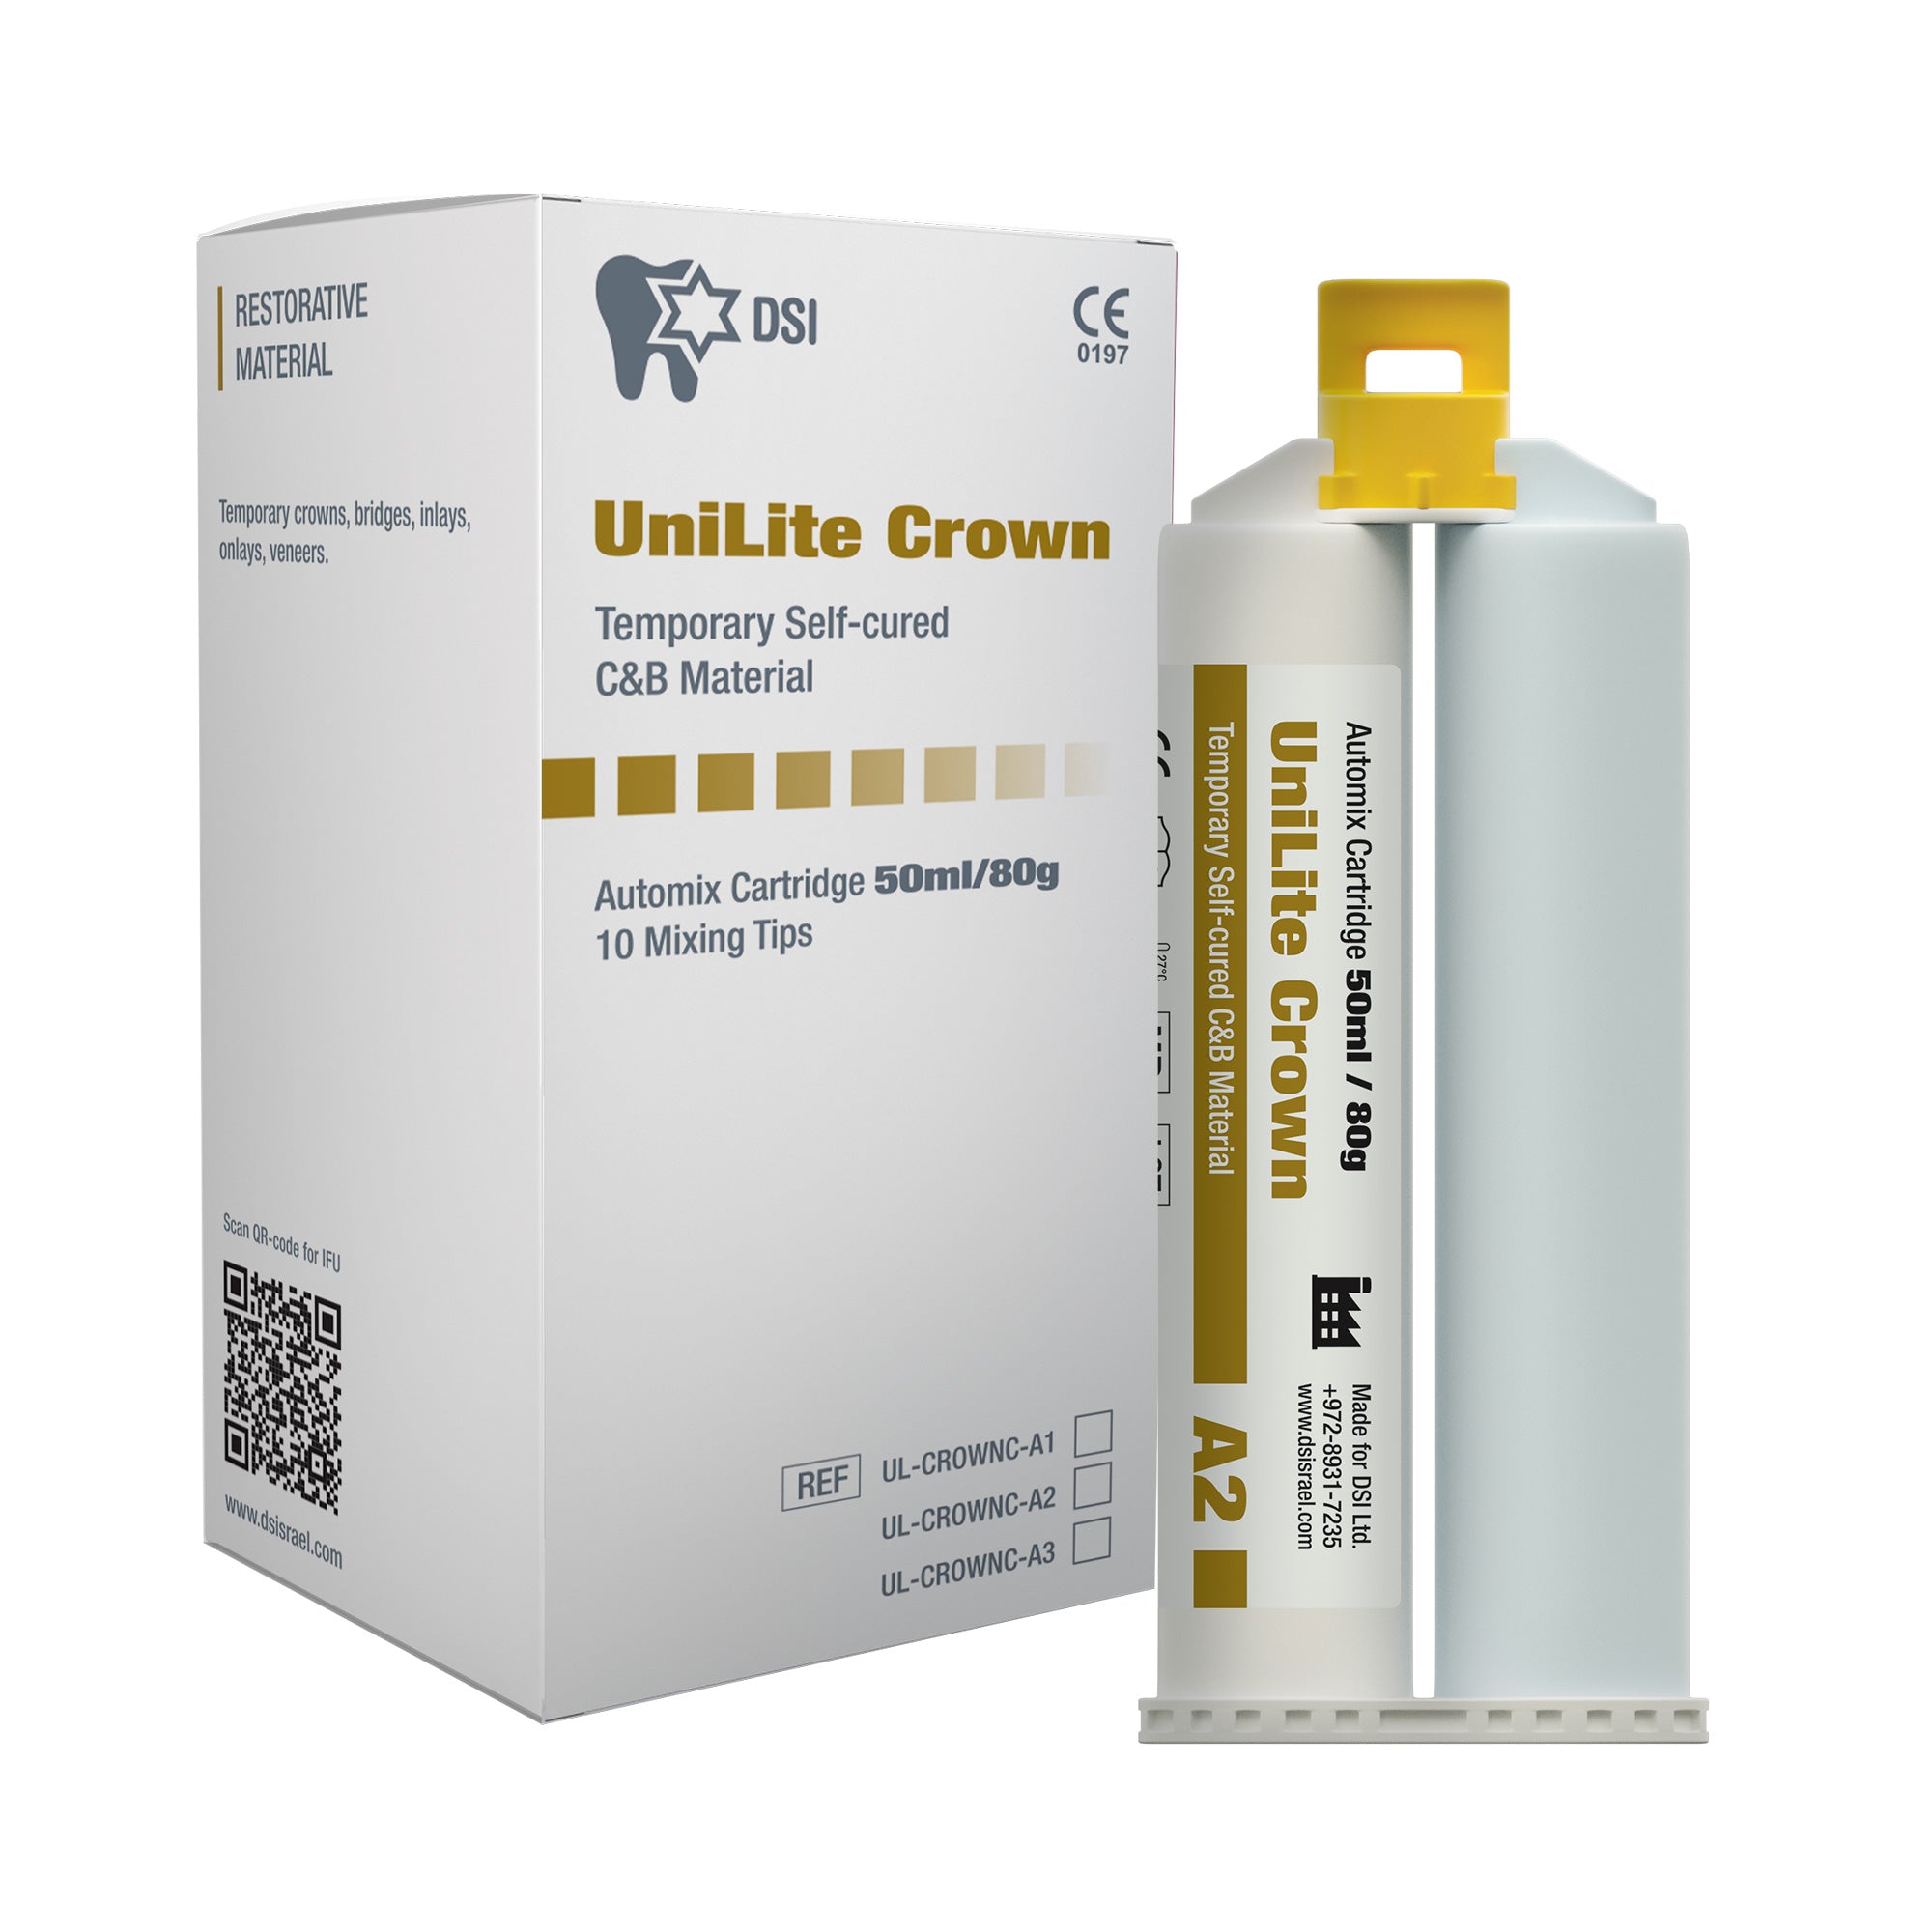 DSI UniLite Crown Temporary Self-Cure C&B Material 80g Automix Cartridge